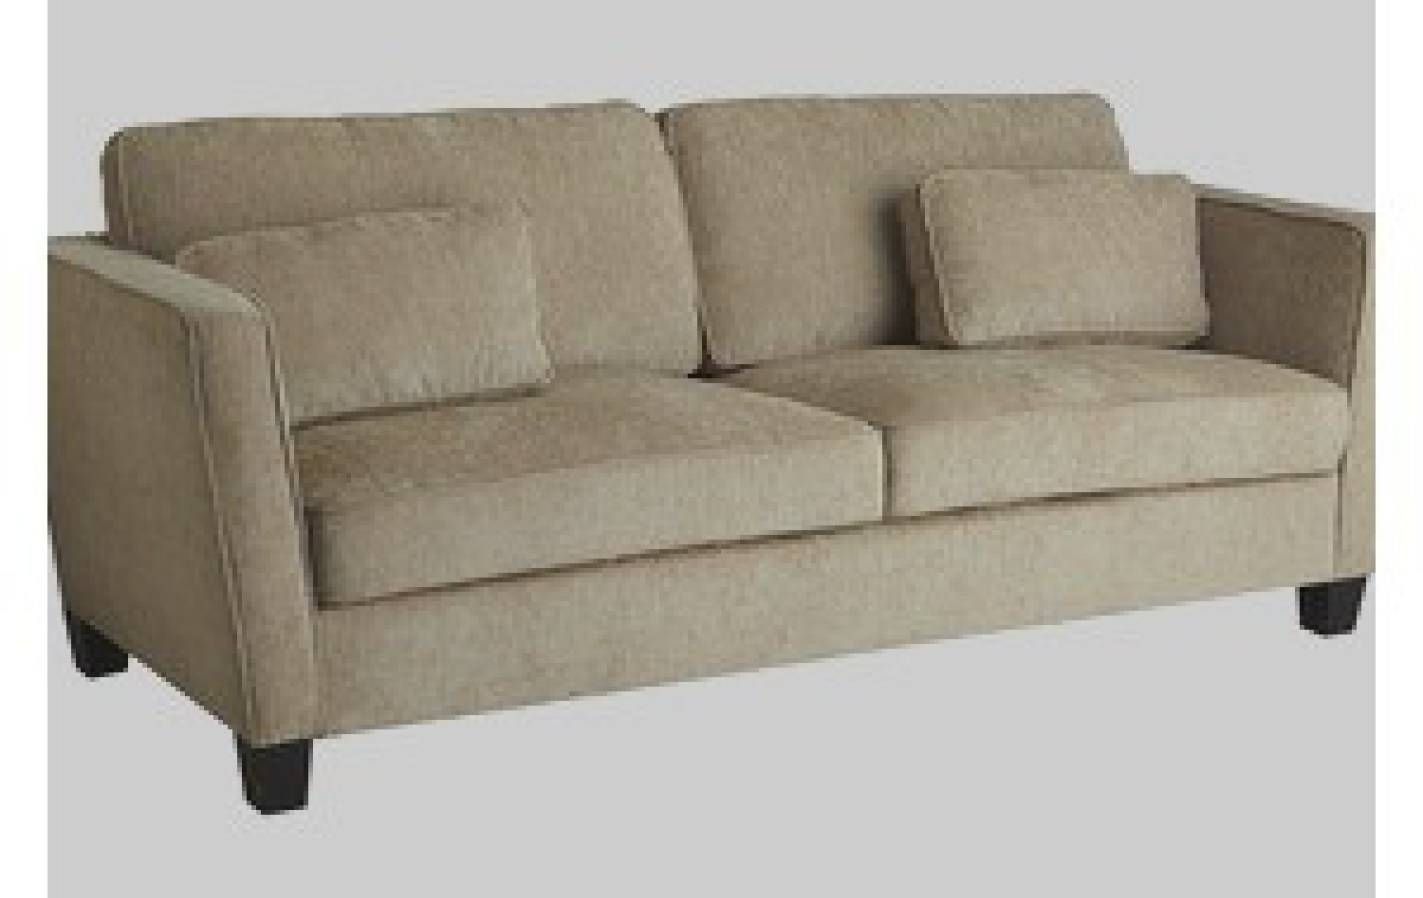 pier one imports sofa beds